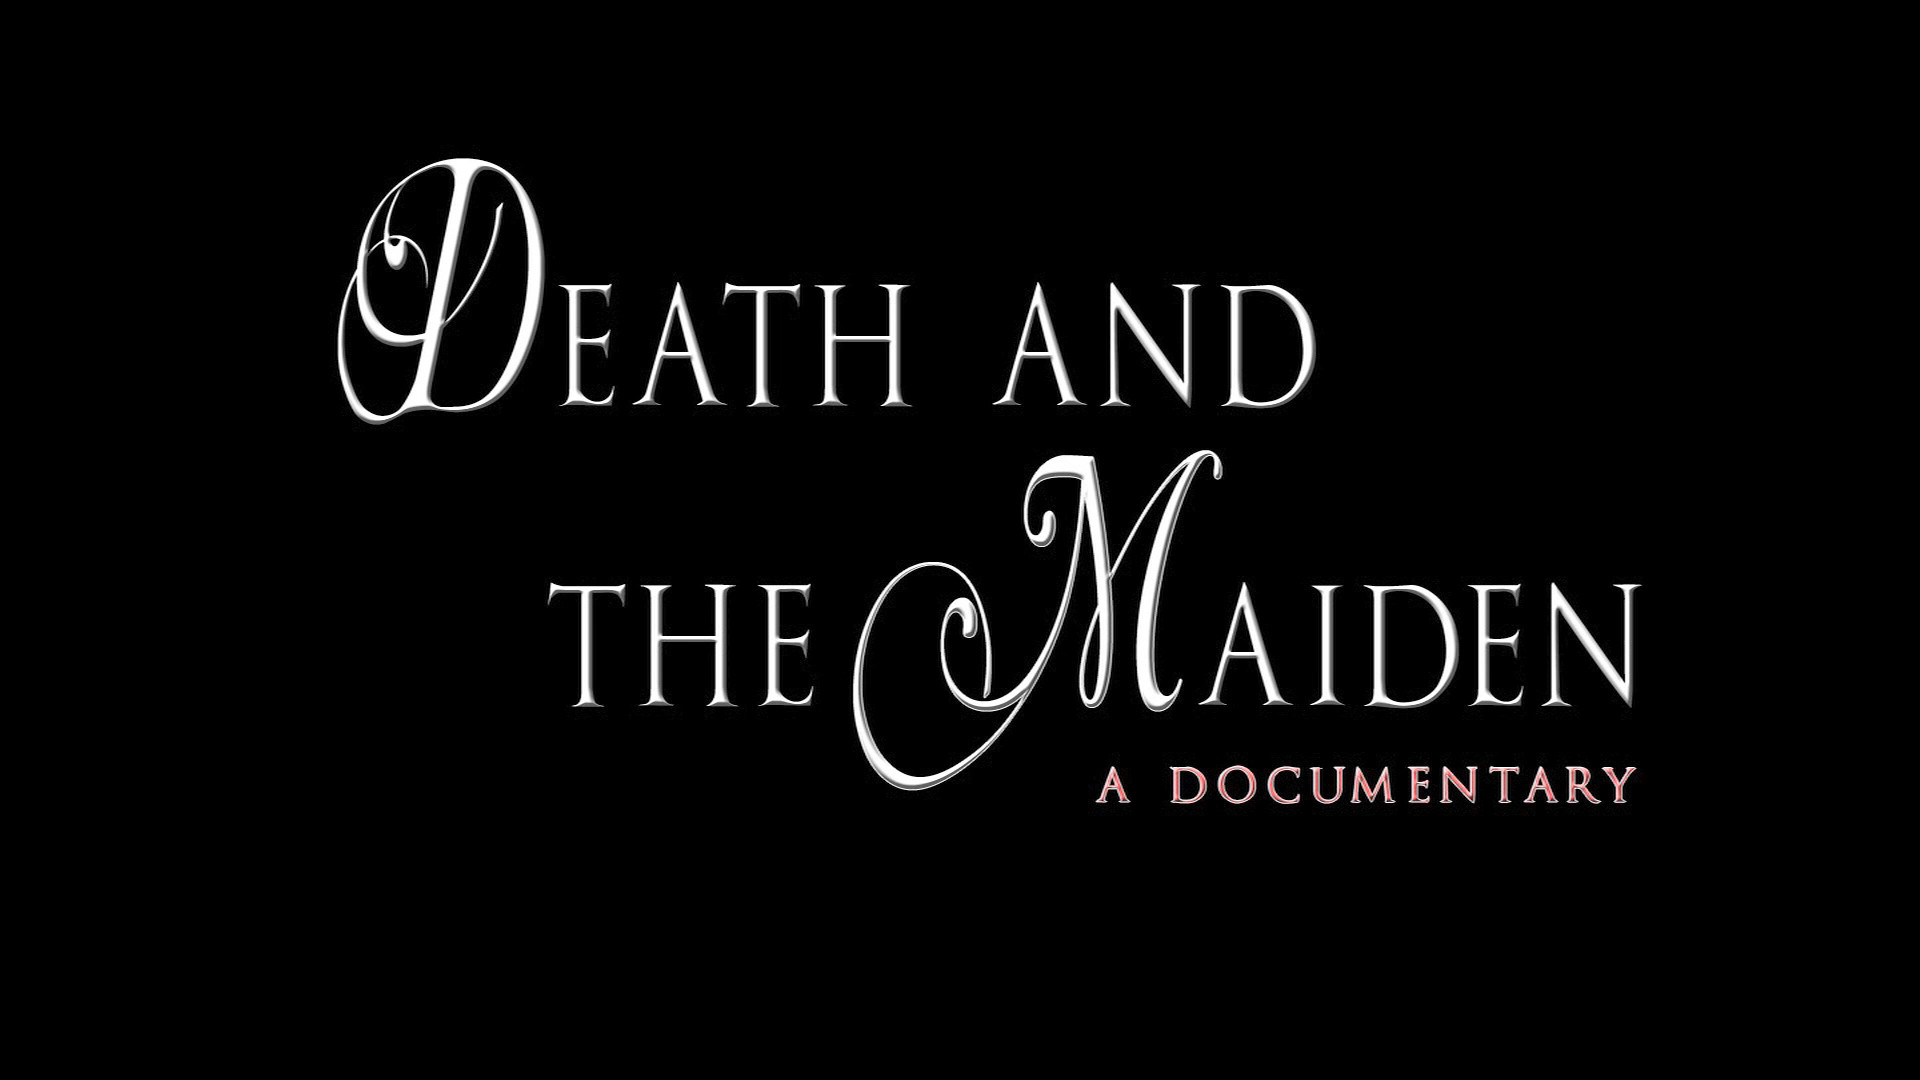 Death and the Maiden: A Documentary to join iChill Manila International Film Fest